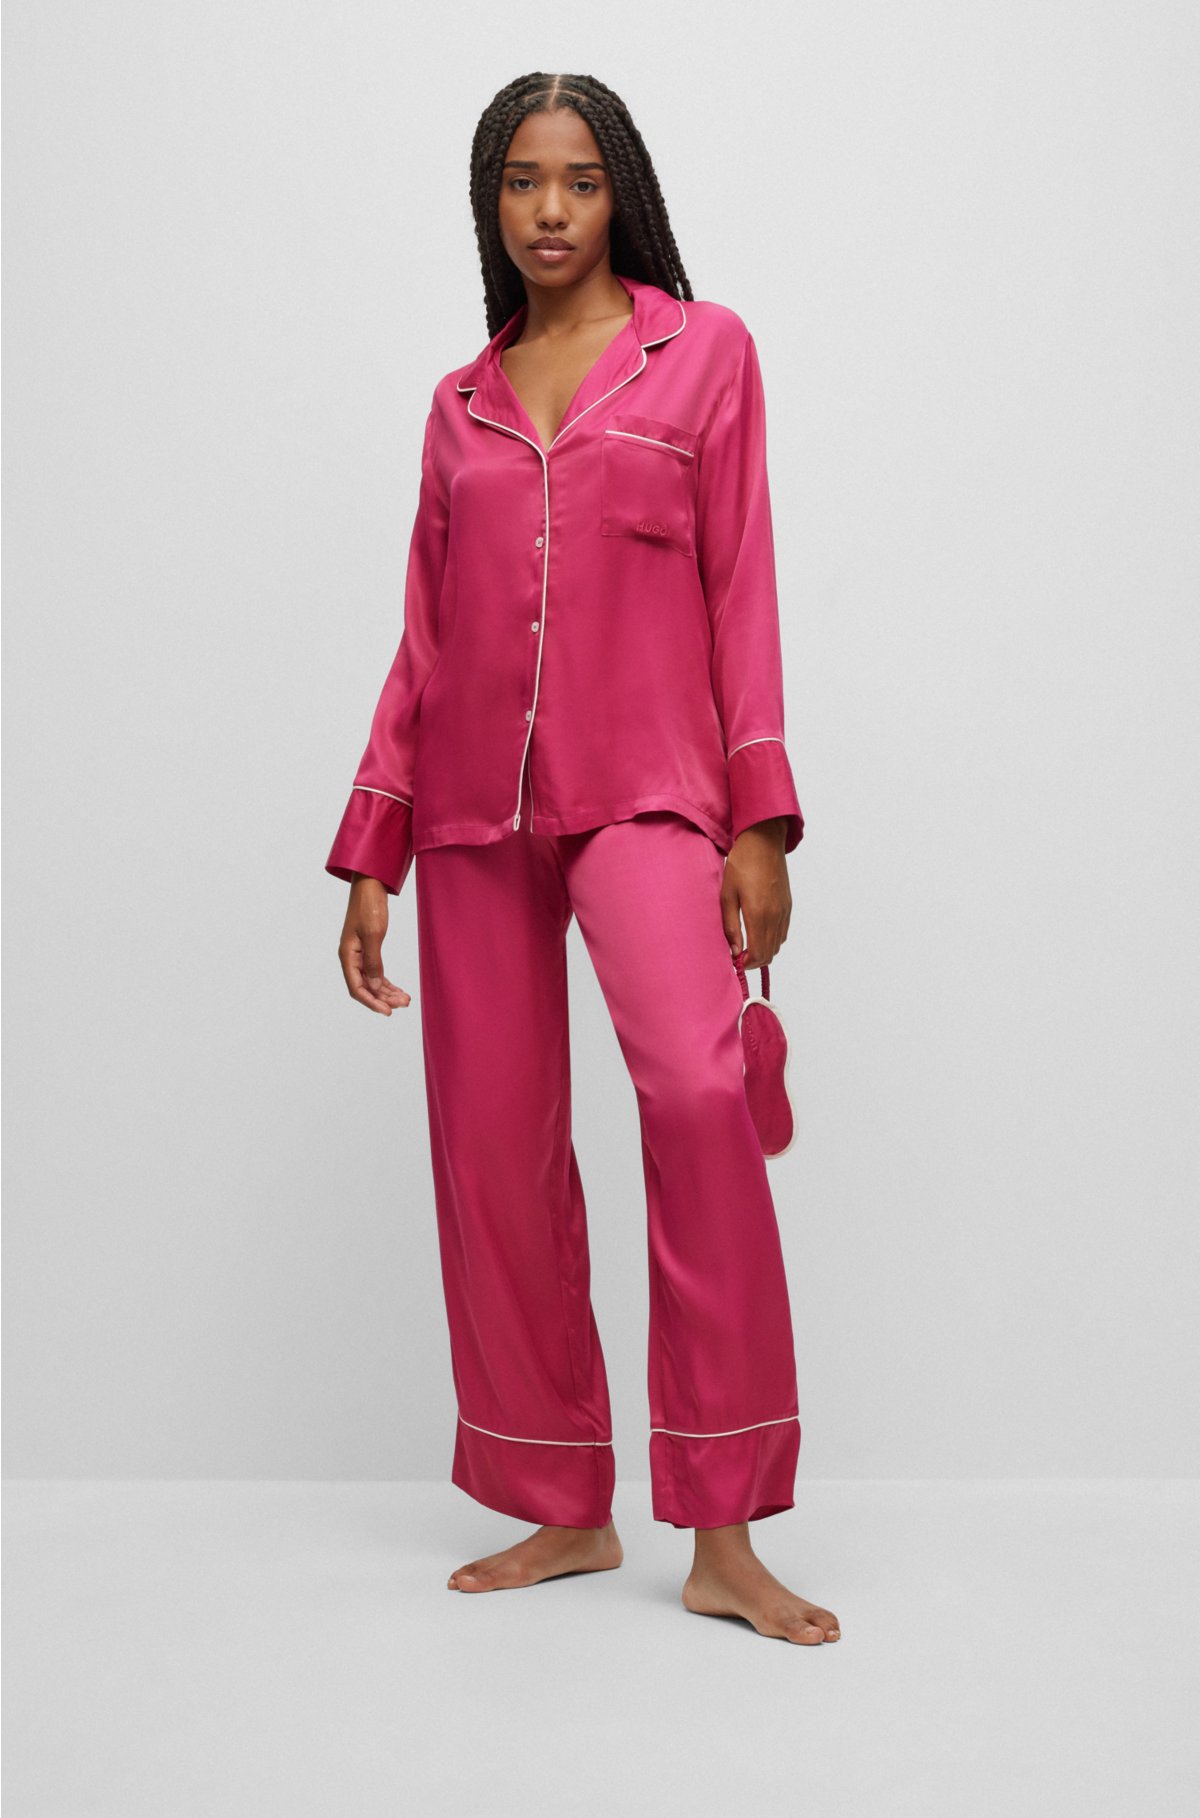 Sale on 85 Silk Pajamas offers and gifts